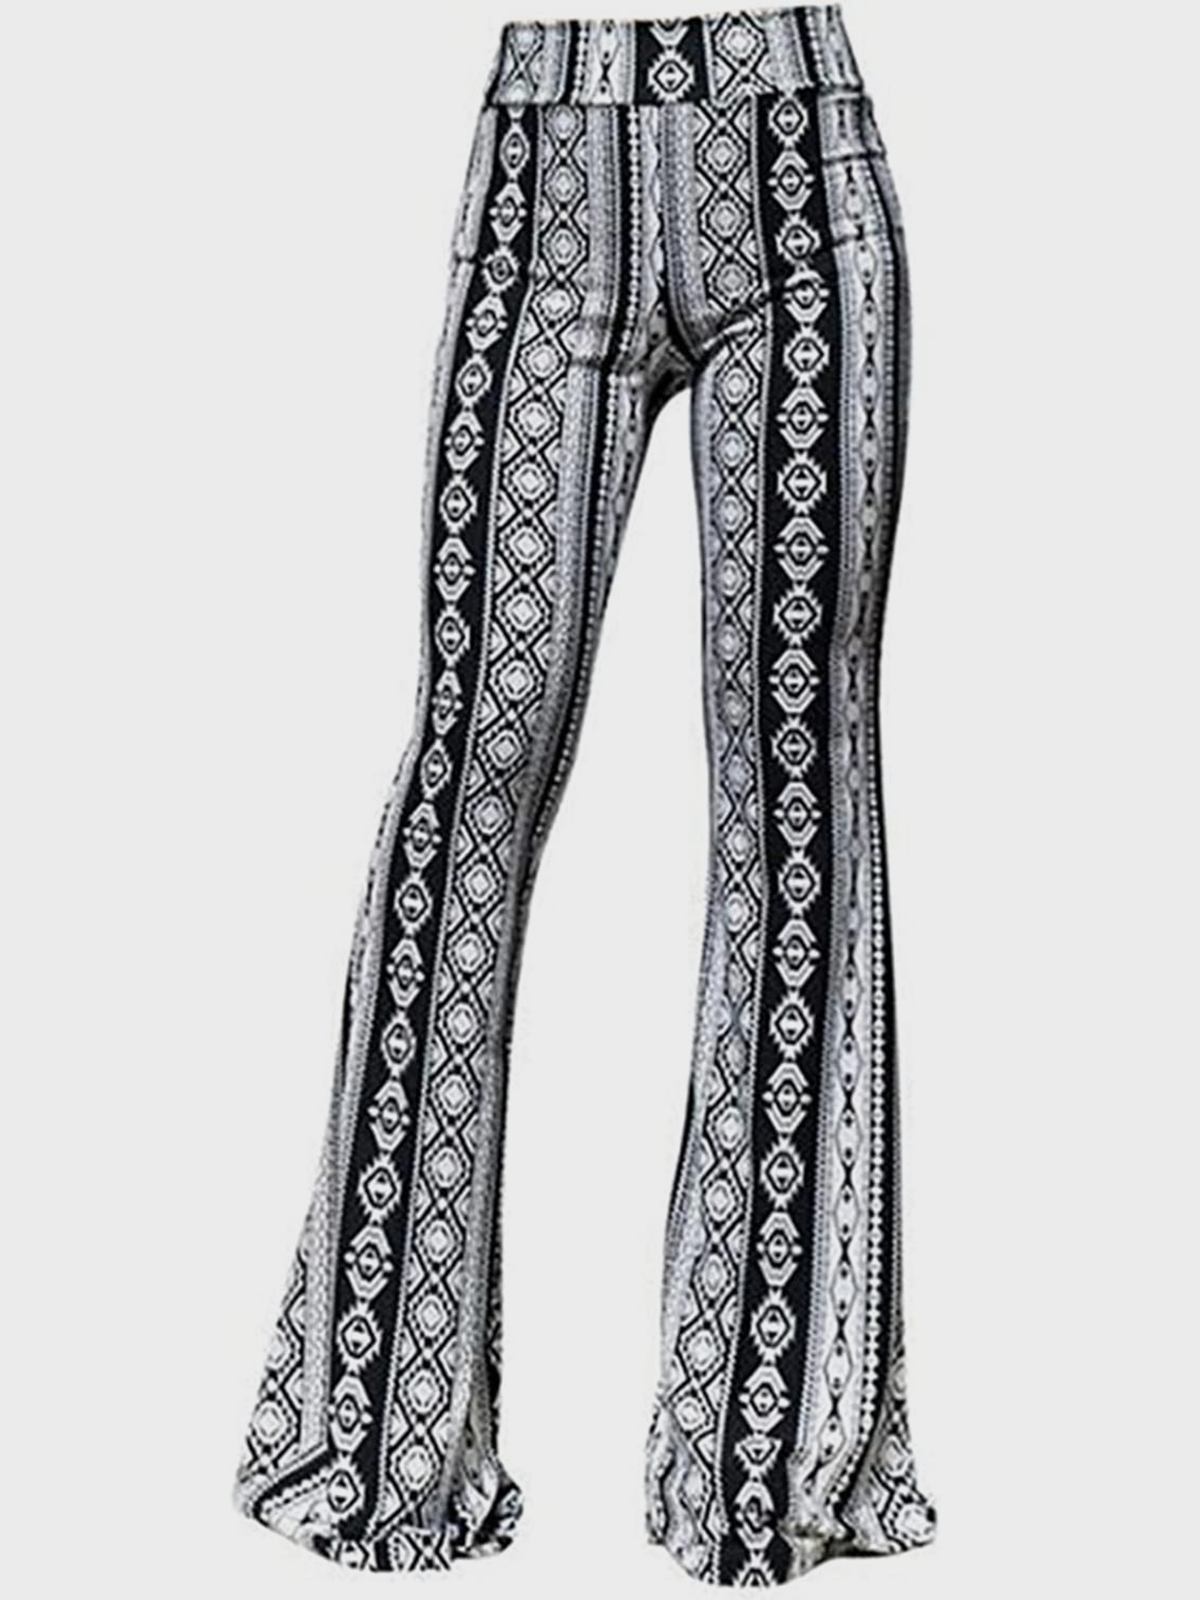 Ethnic Bell-Bottomtrousers Pant